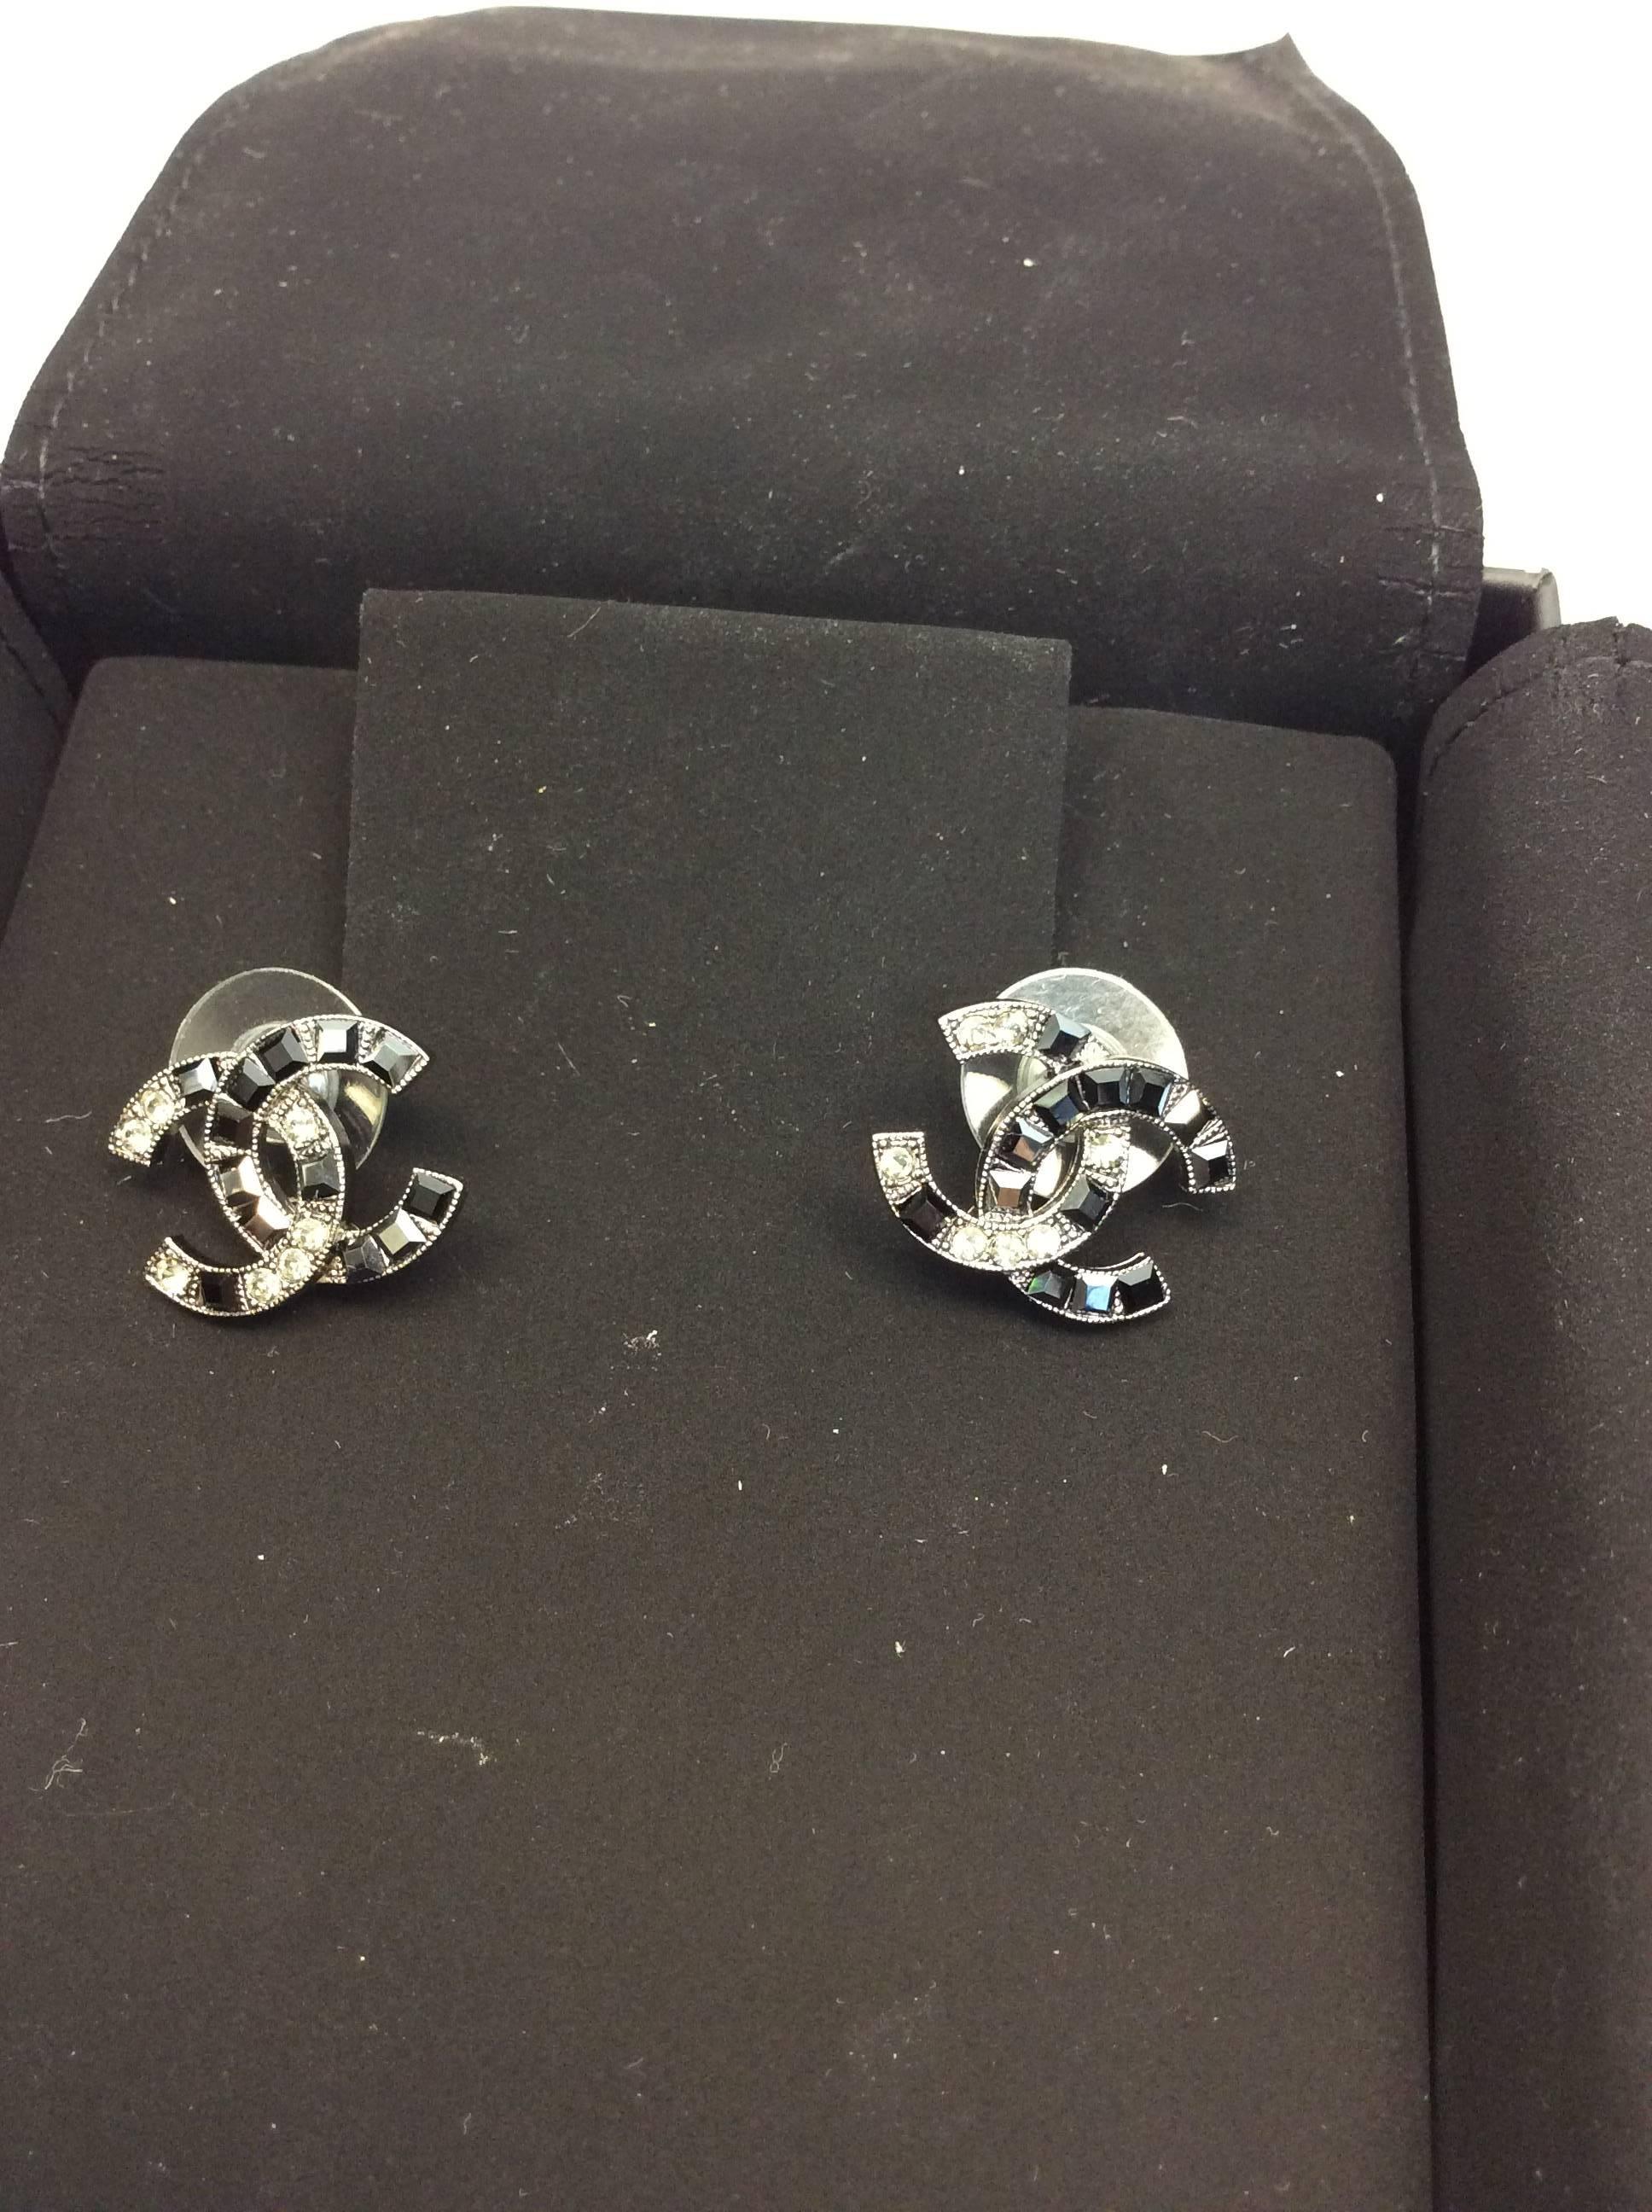 Chanel Black and White Logo Earrings In Excellent Condition For Sale In Narberth, PA